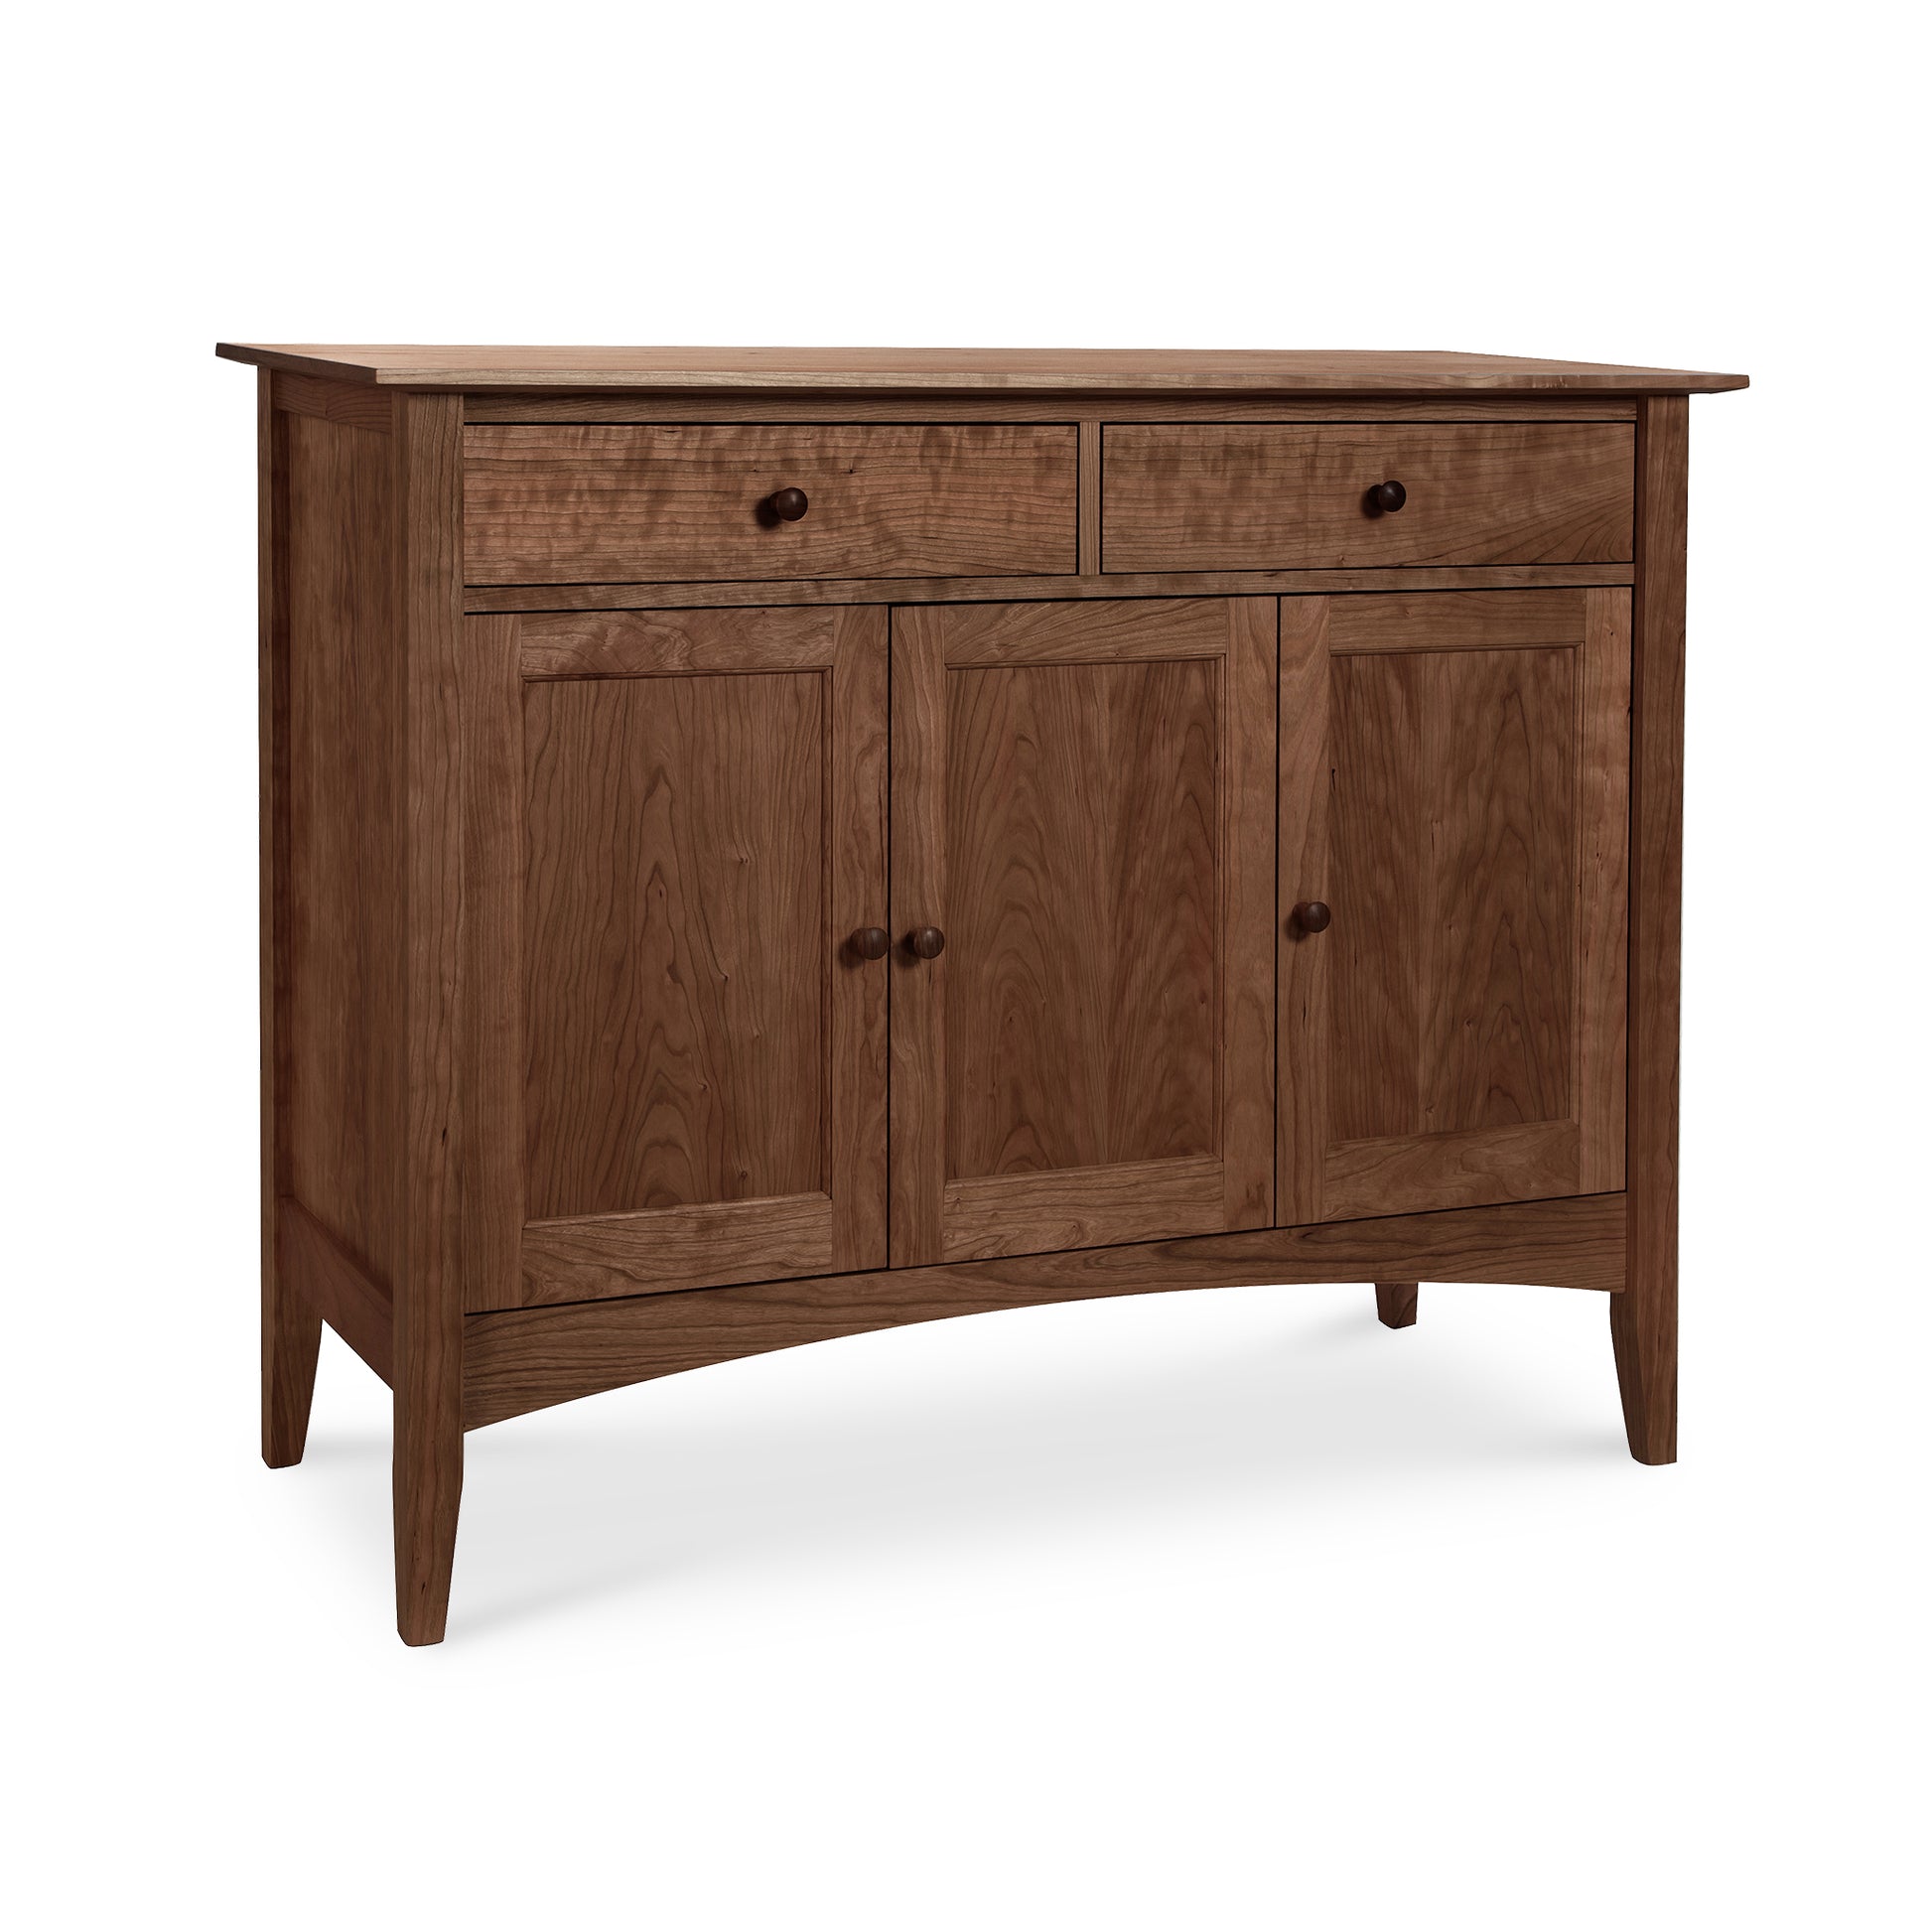 This Maple Corner Woodworks American Shaker Large Sideboard showcases Vermont craftsmanship with solid hardwood construction. Featuring two drawers and two doors, it combines timeless design with exceptional quality.